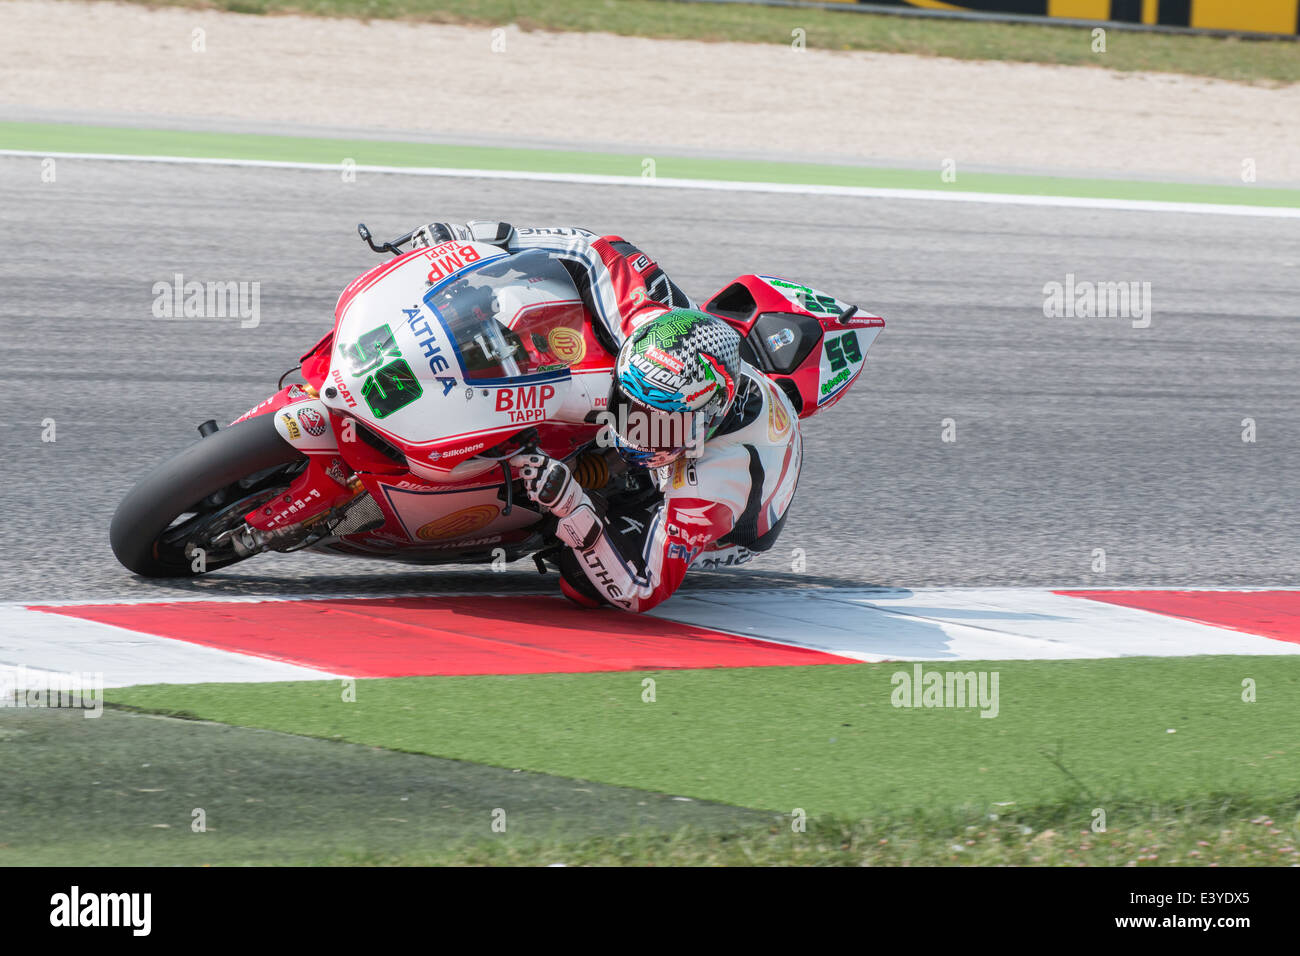 Ducati 1199 Panigale R EVO of Althea Racing team, driven by CANEPA Niccolò in action during the Superbike Free Practice Stock Photo